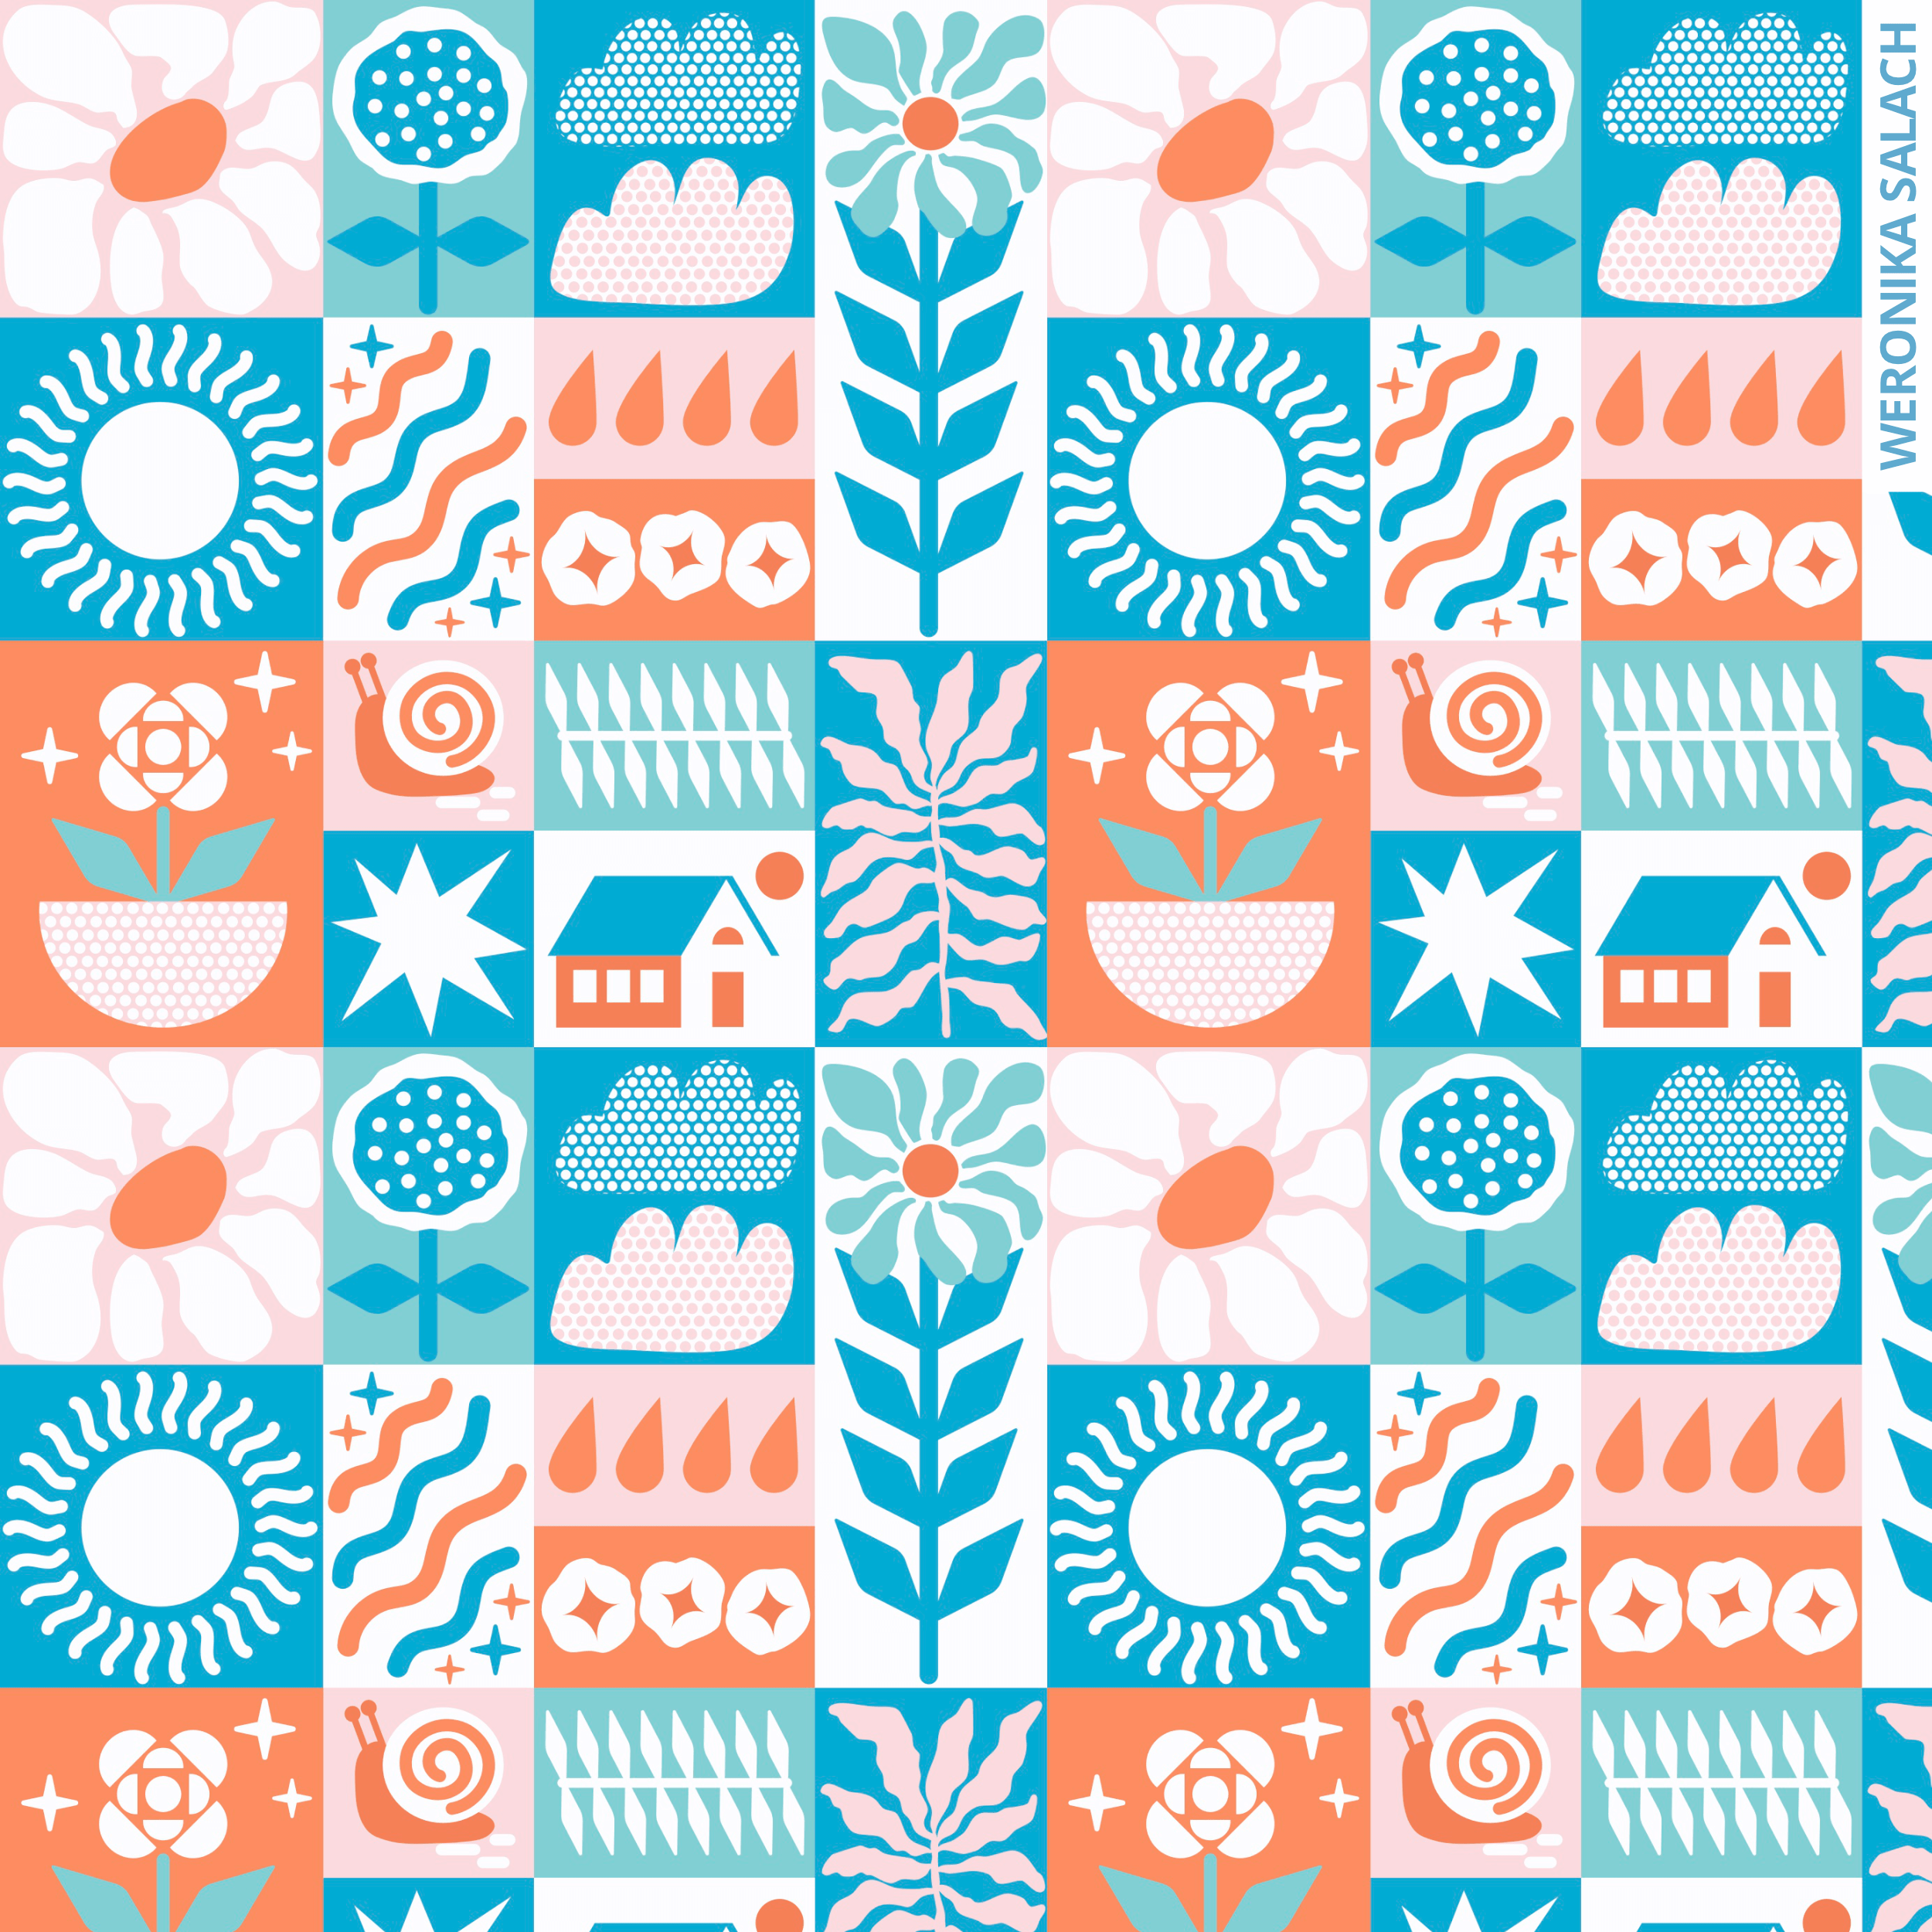 WS_repeat pattern_graphic modern orange turquoise.png